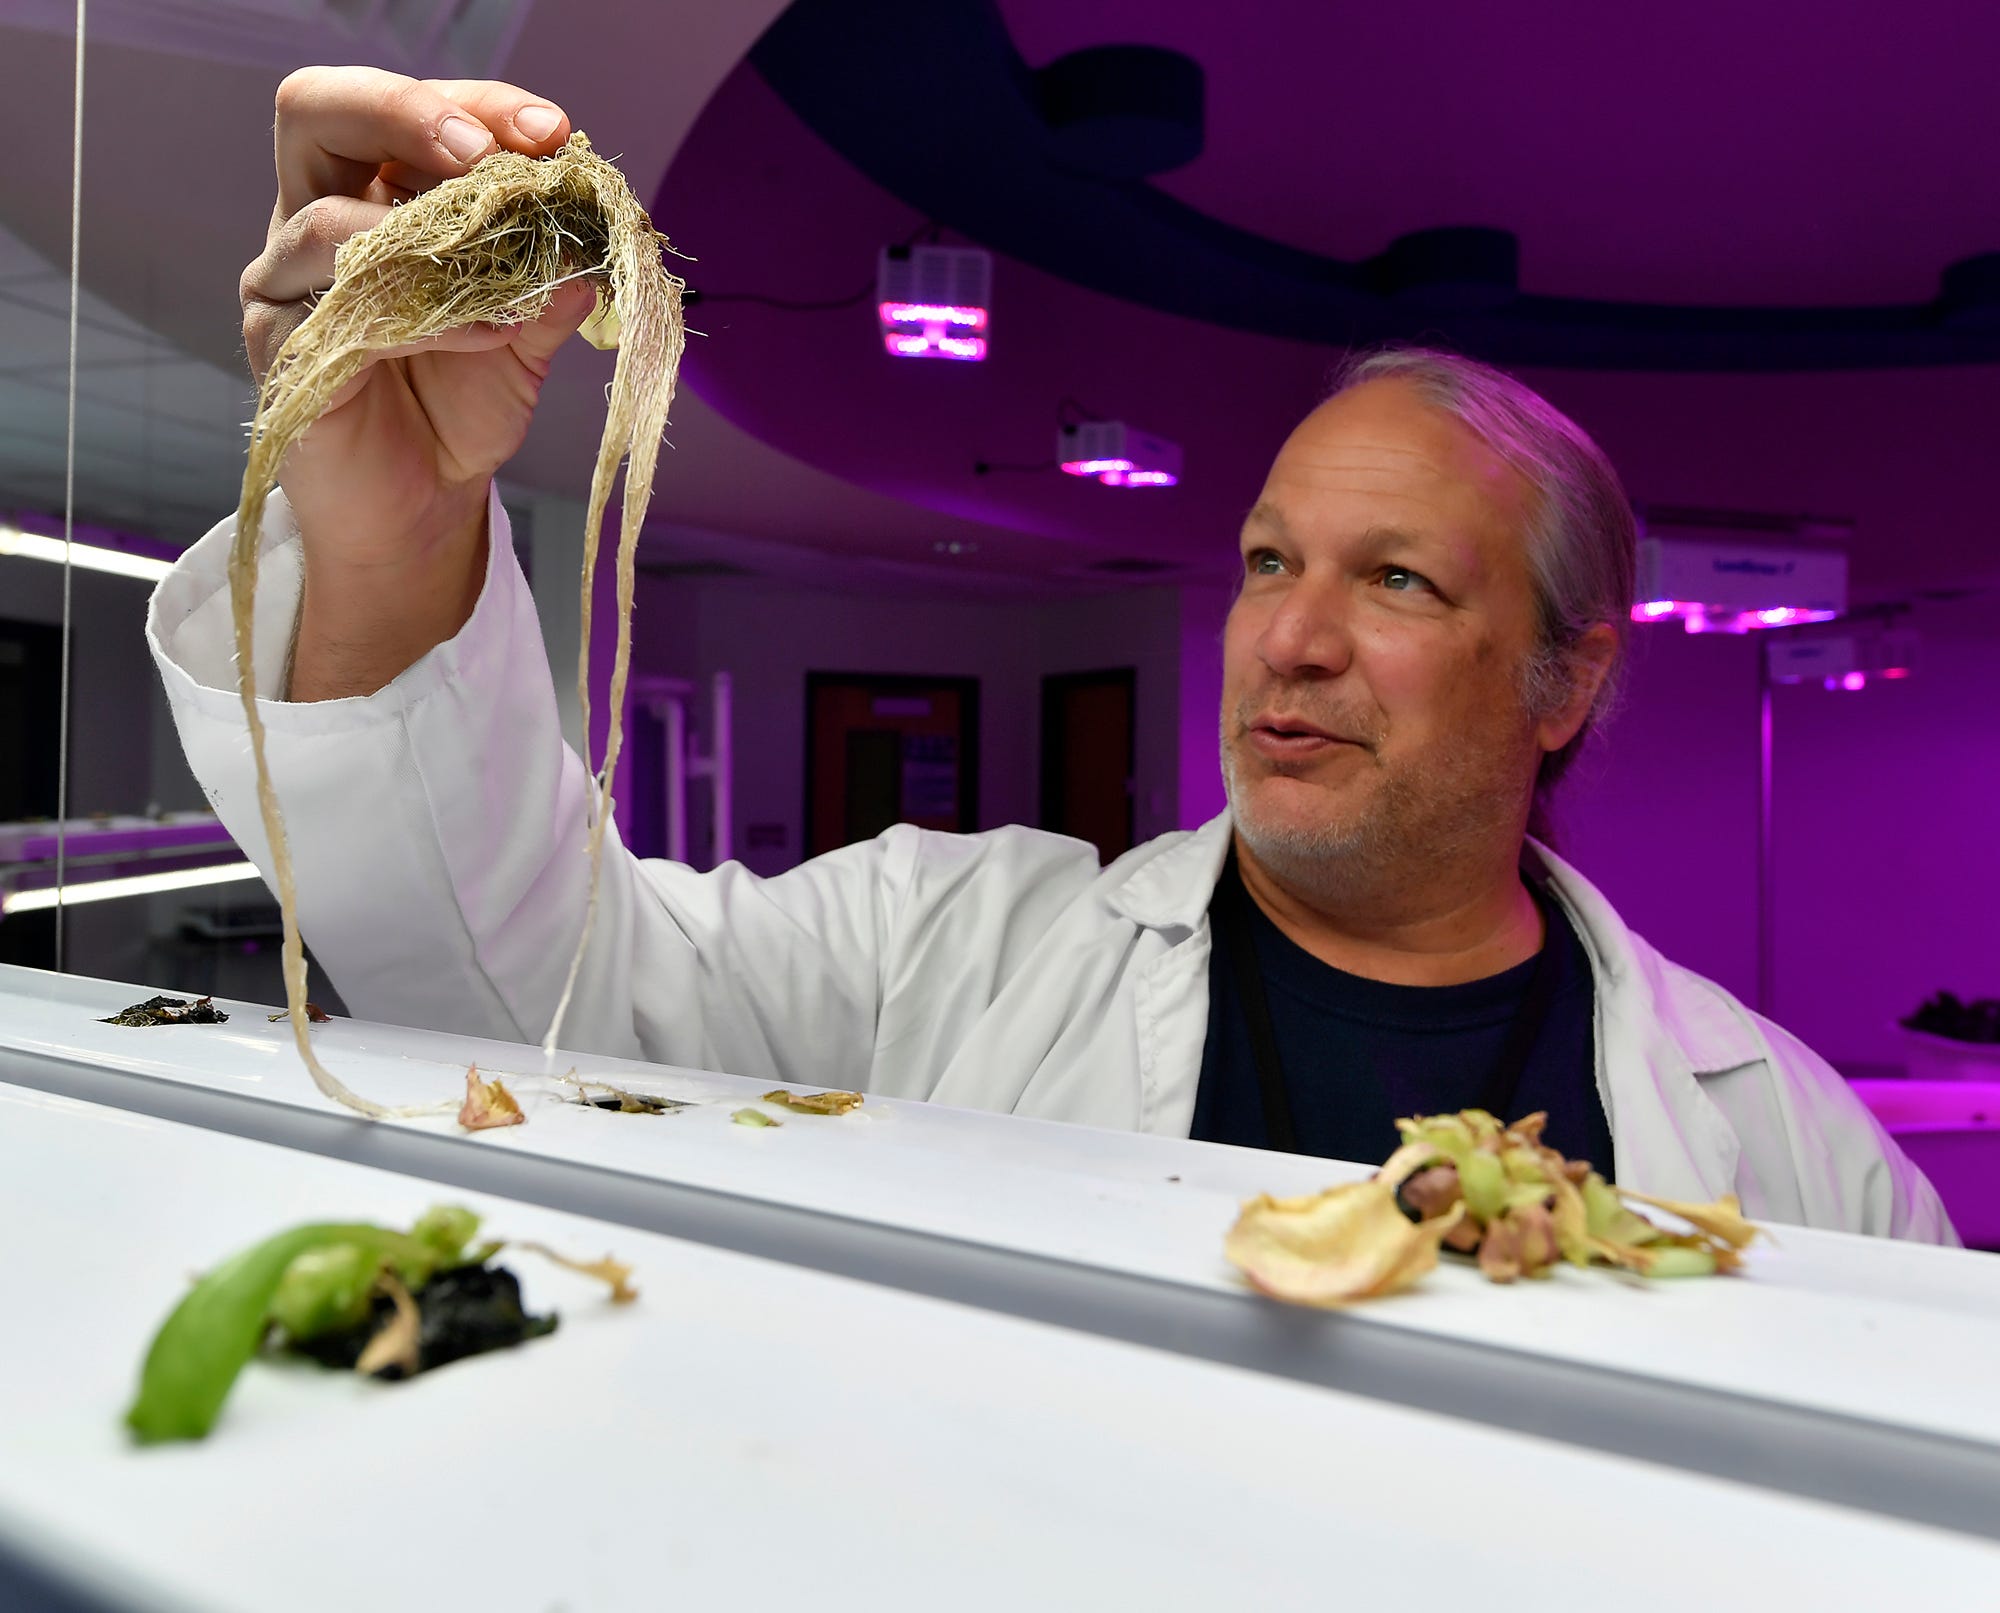 Teacher Justin Weaver shows the root growth of lettuce plants grown in the the West Shore Aquaponics lab, Tuesday, December 3, 2019
John A. Pavoncello photo